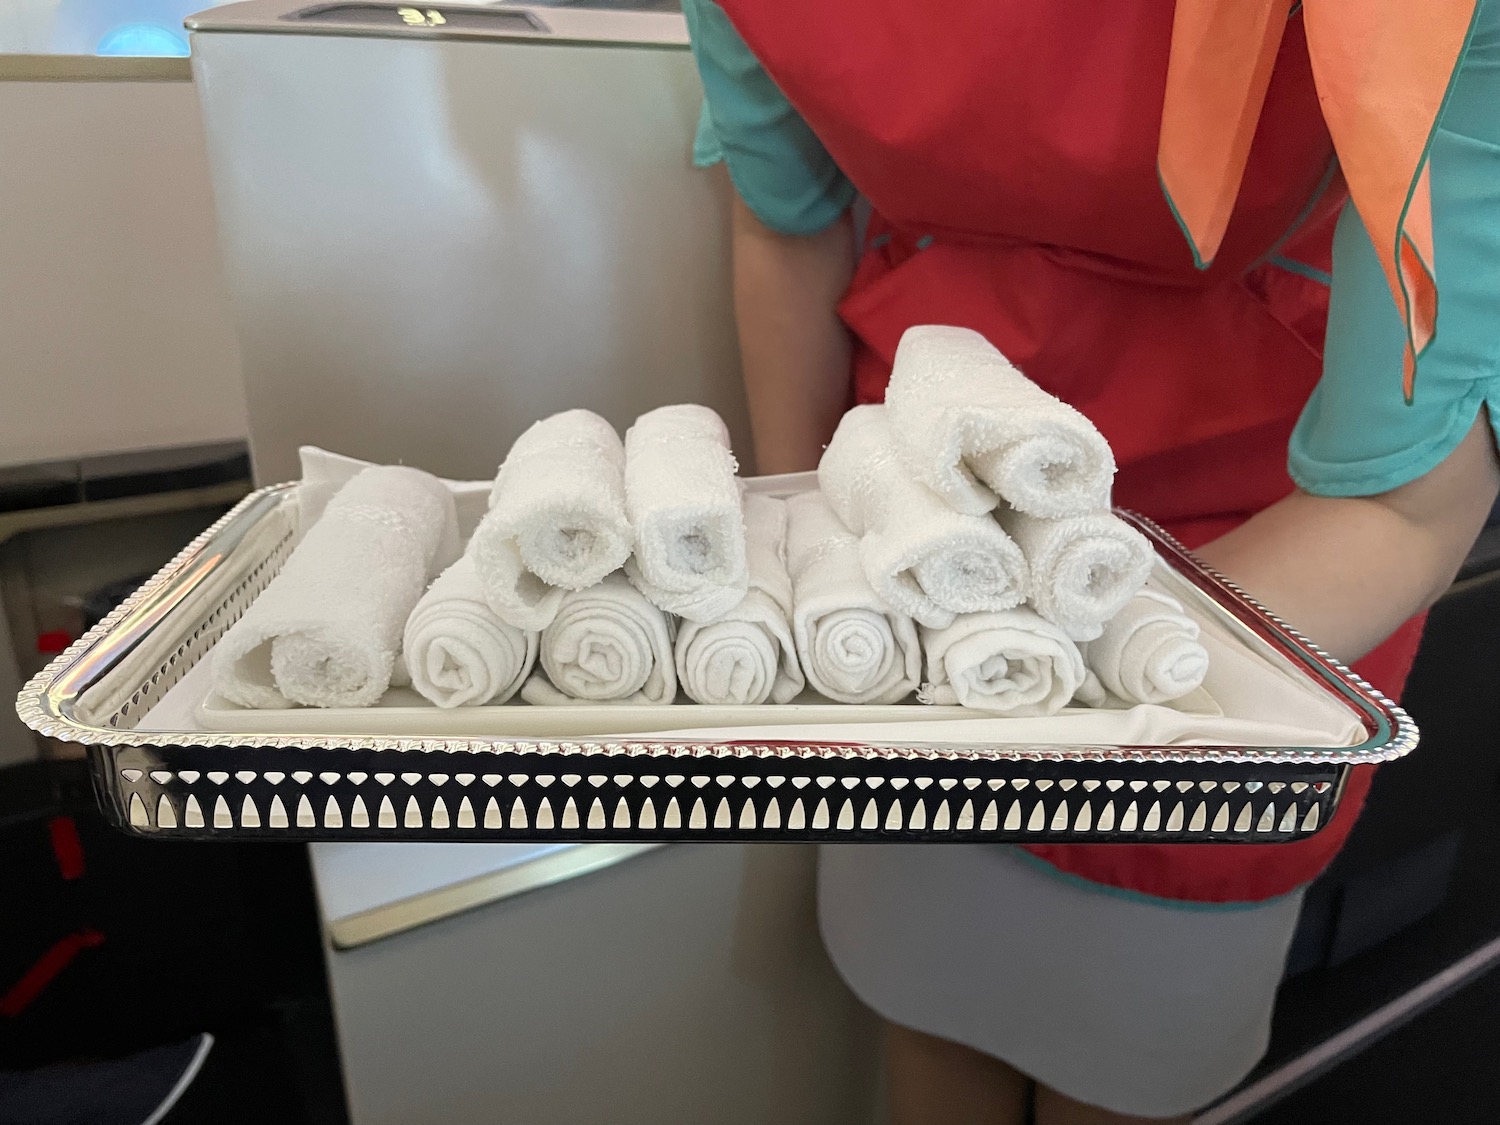 a tray of rolled up towels